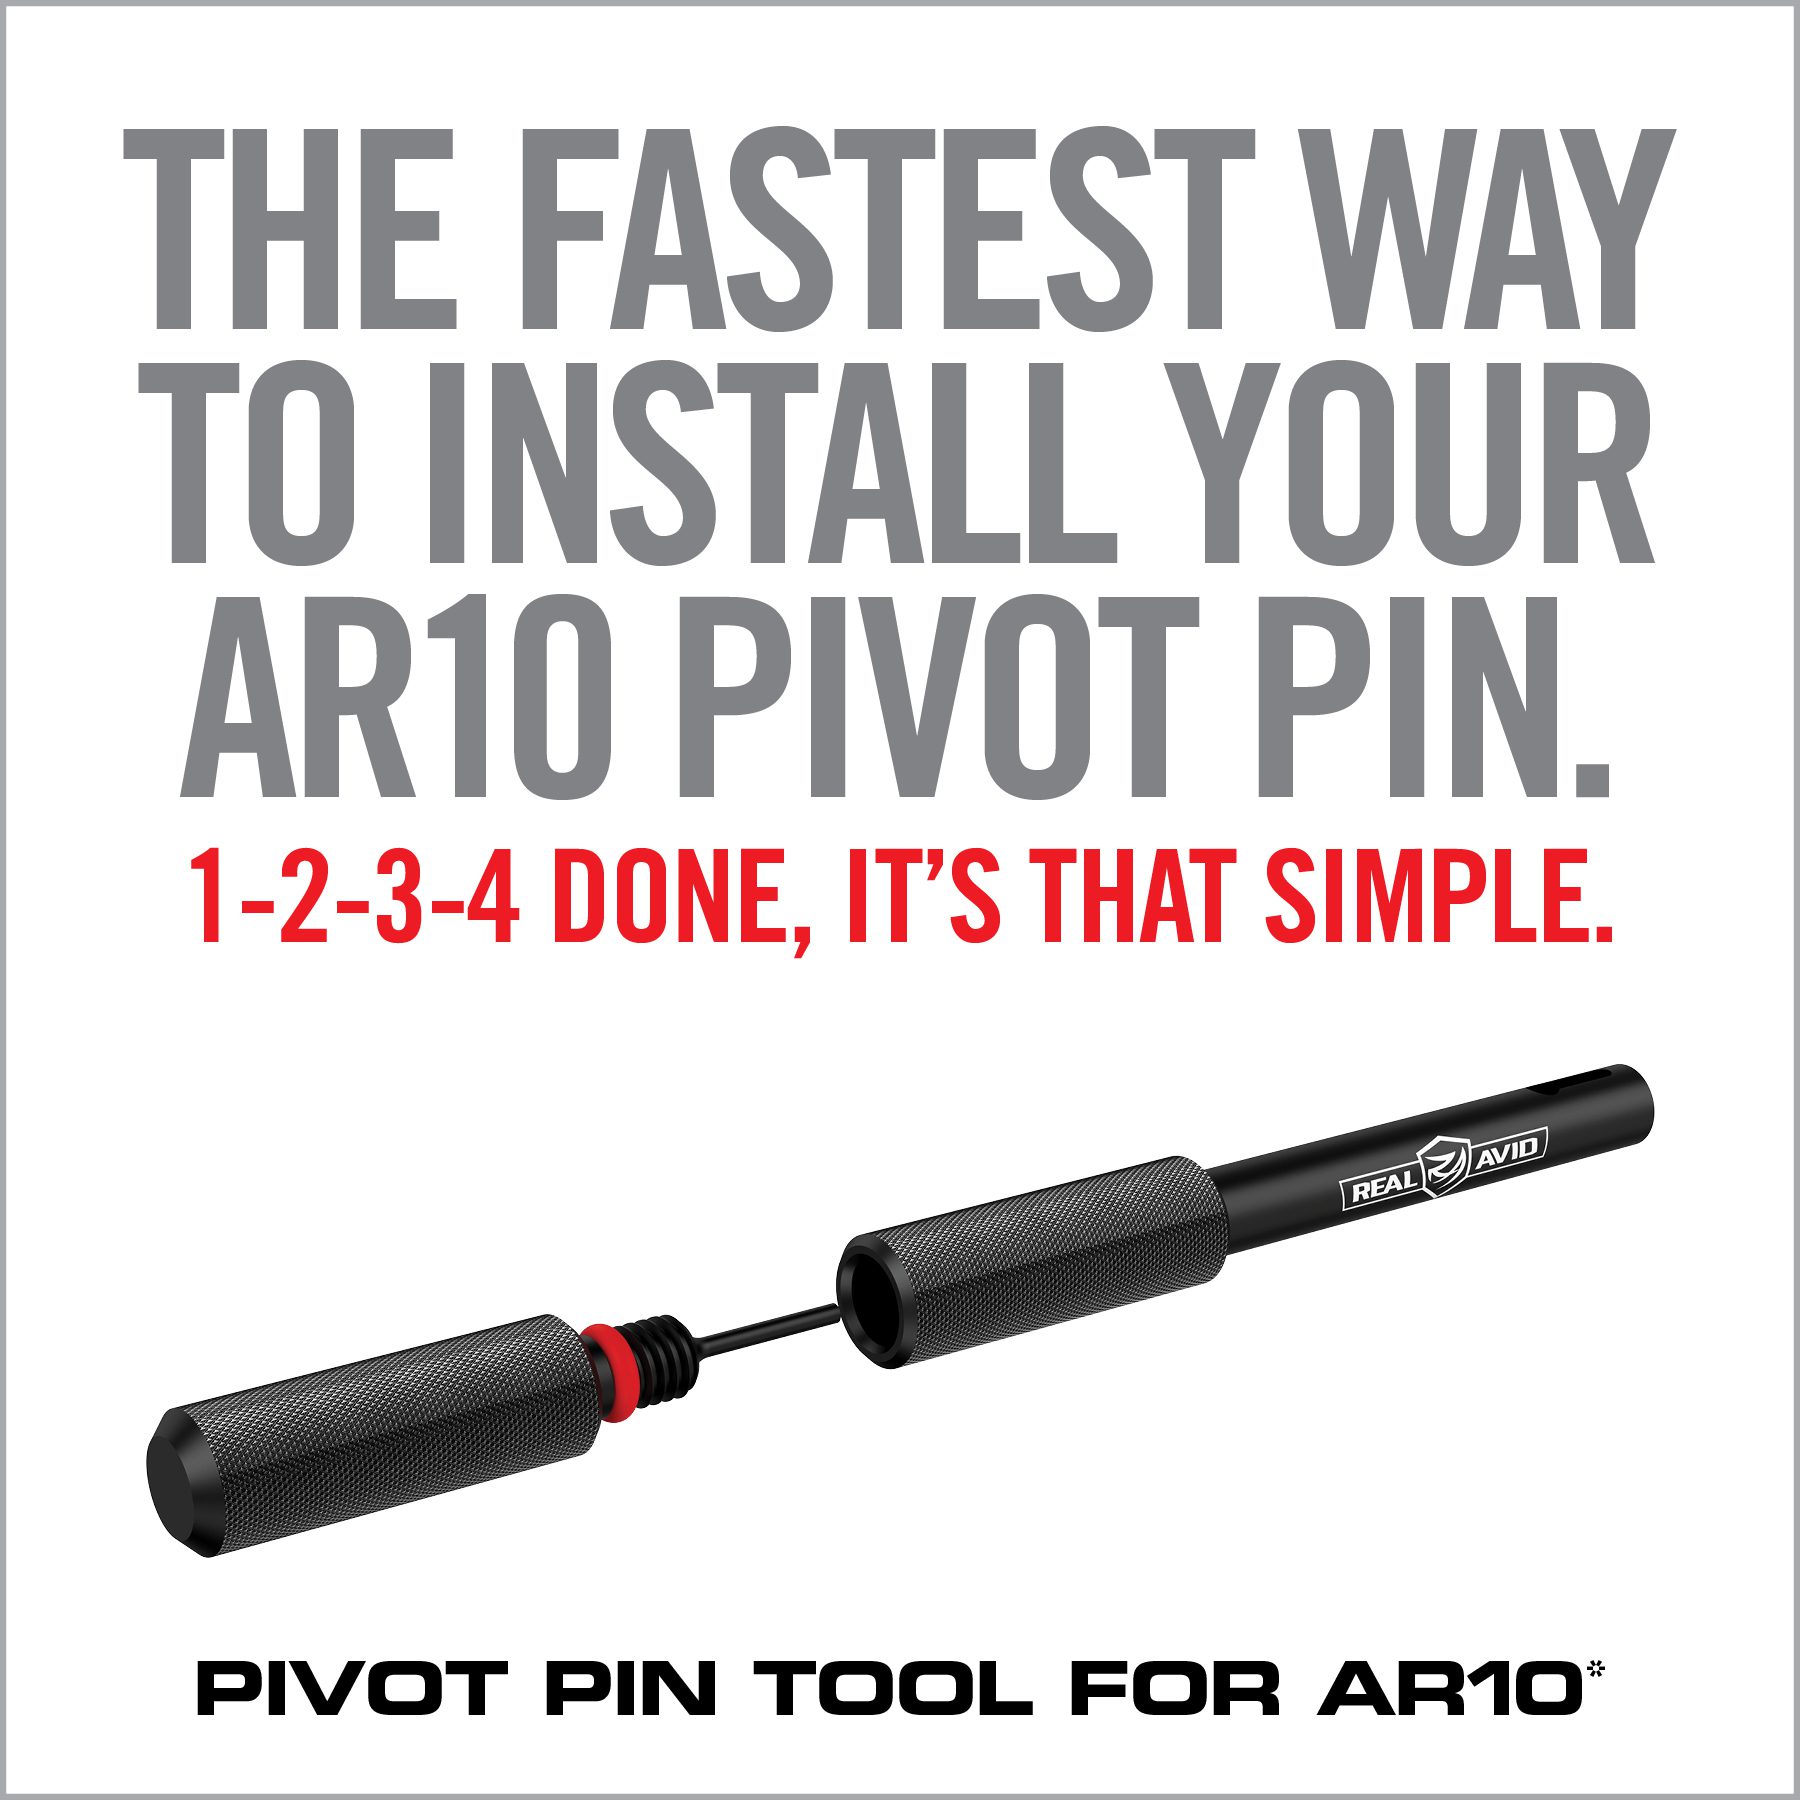 an ad for pivot pin tool